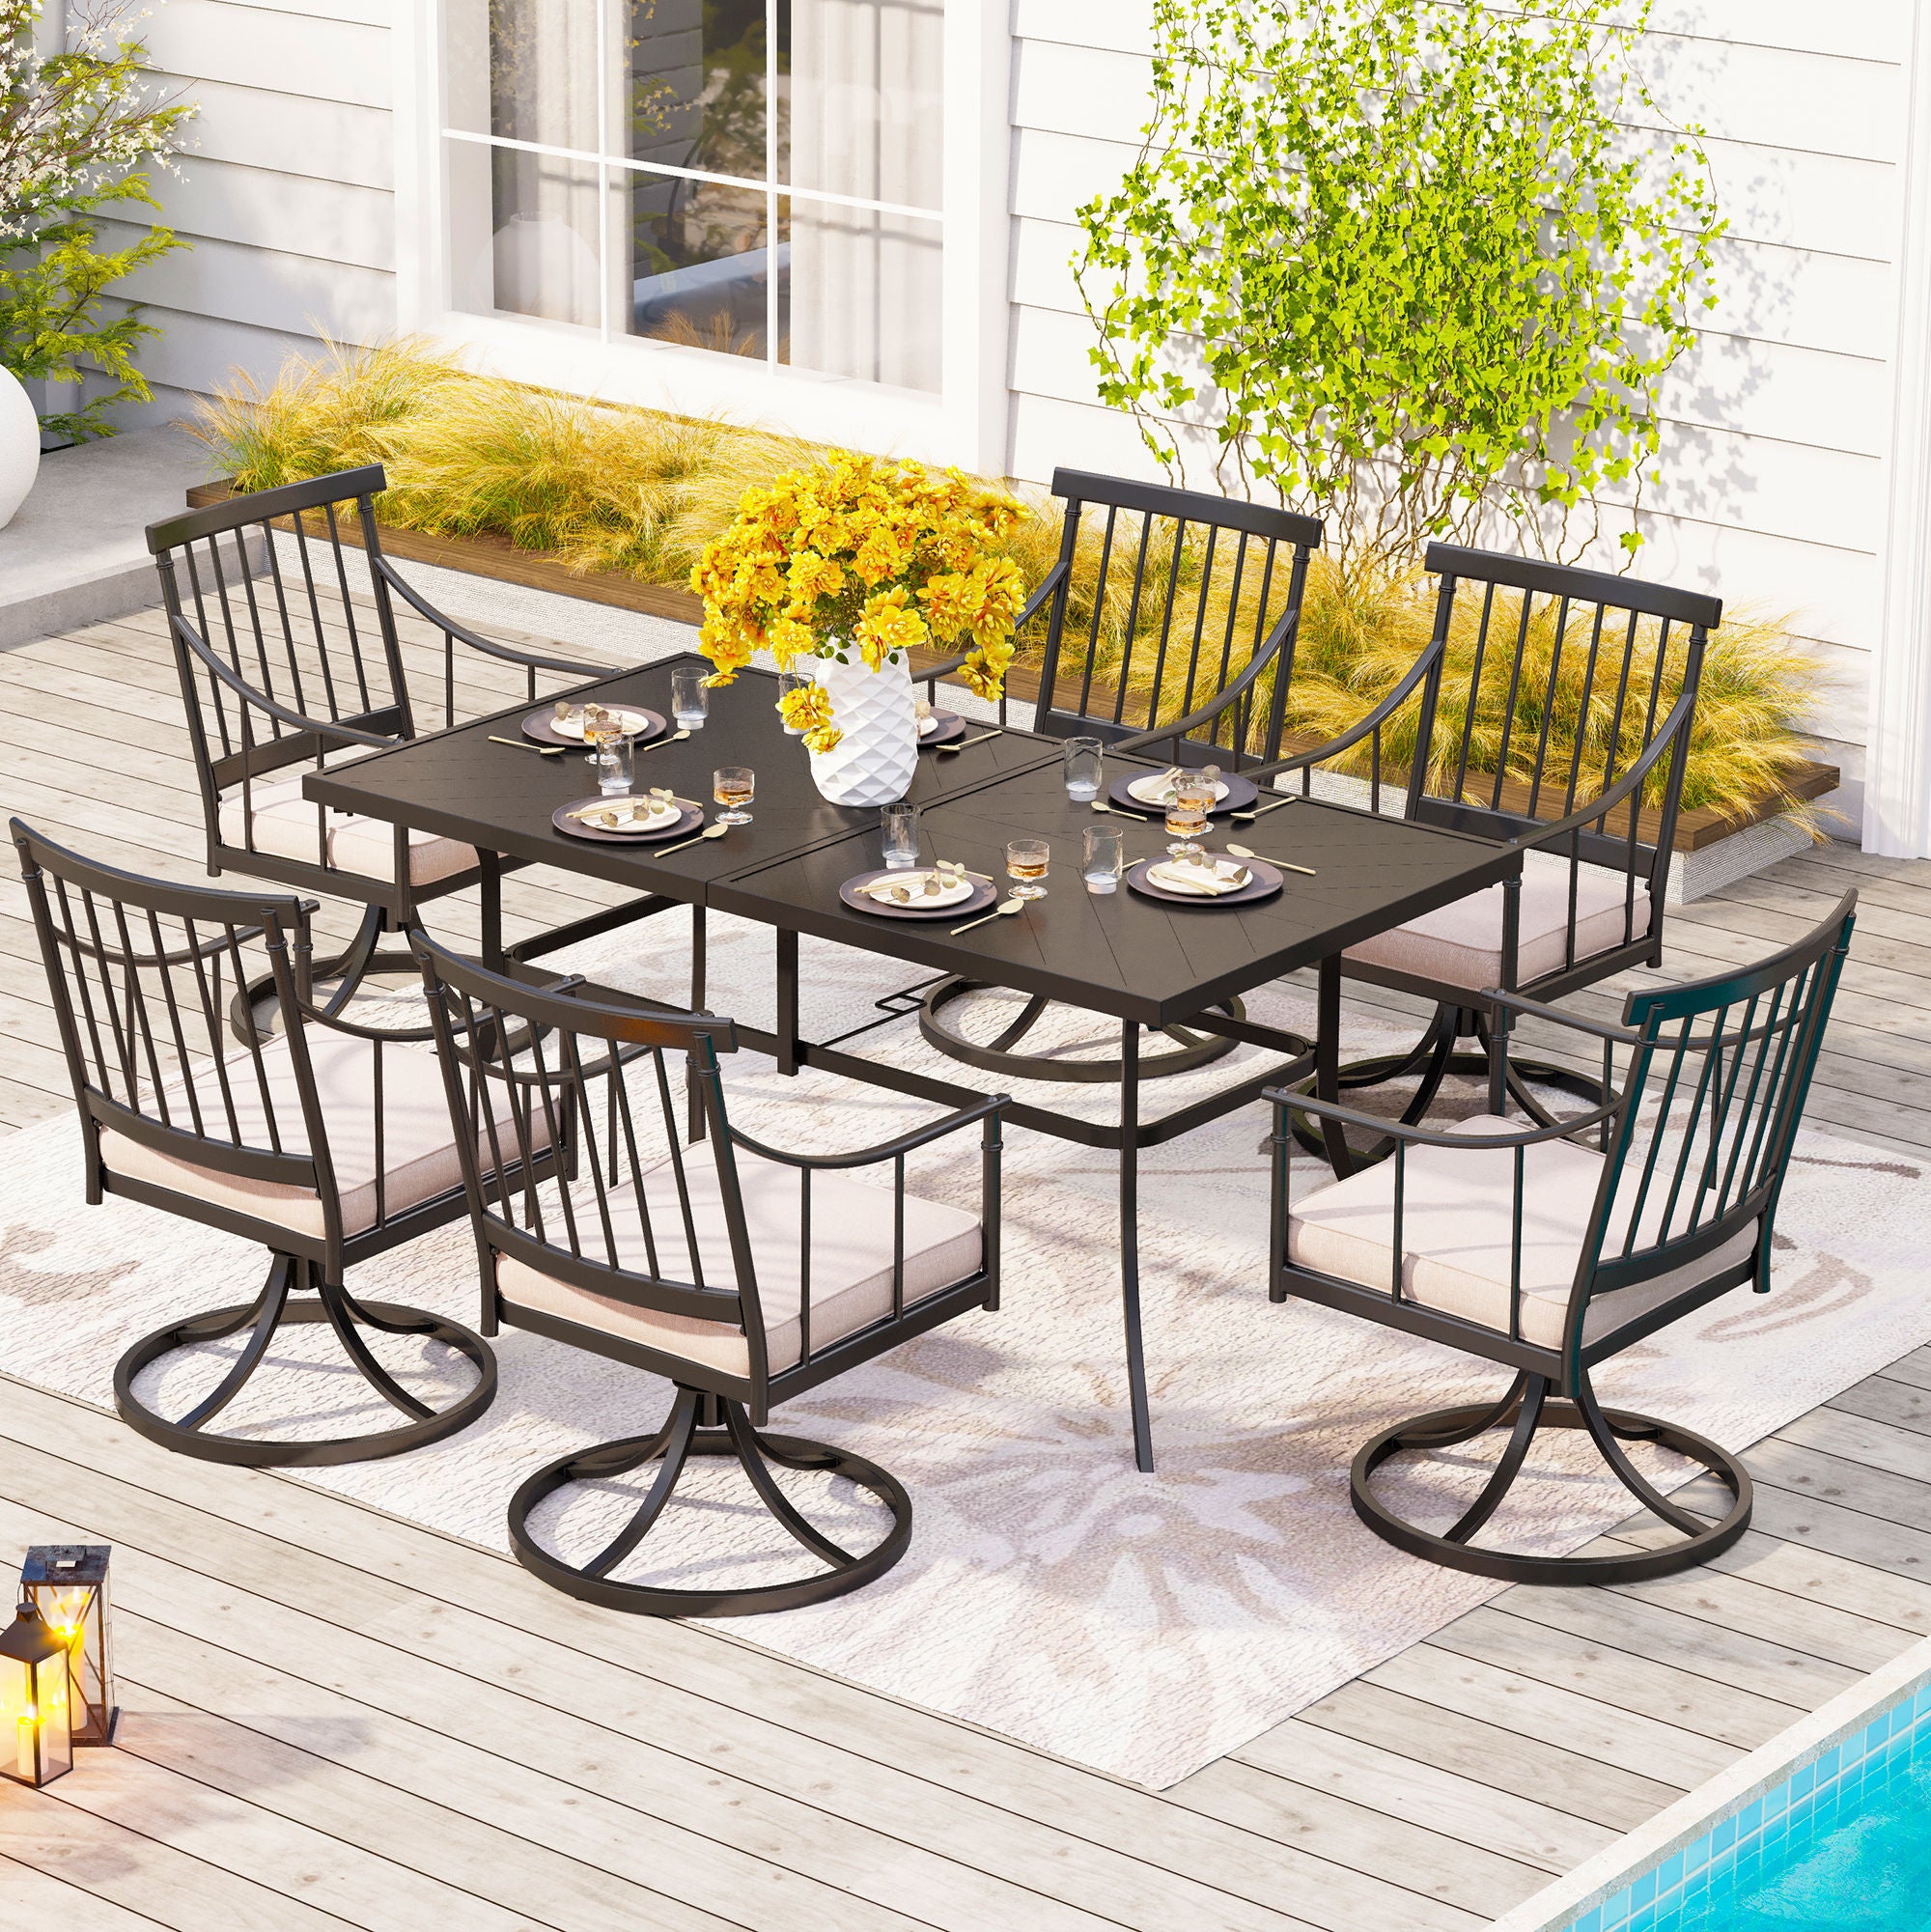 Sophia & William 7-Piece Patio Dining Sets Embossed Table & Stylish Steel Chairs